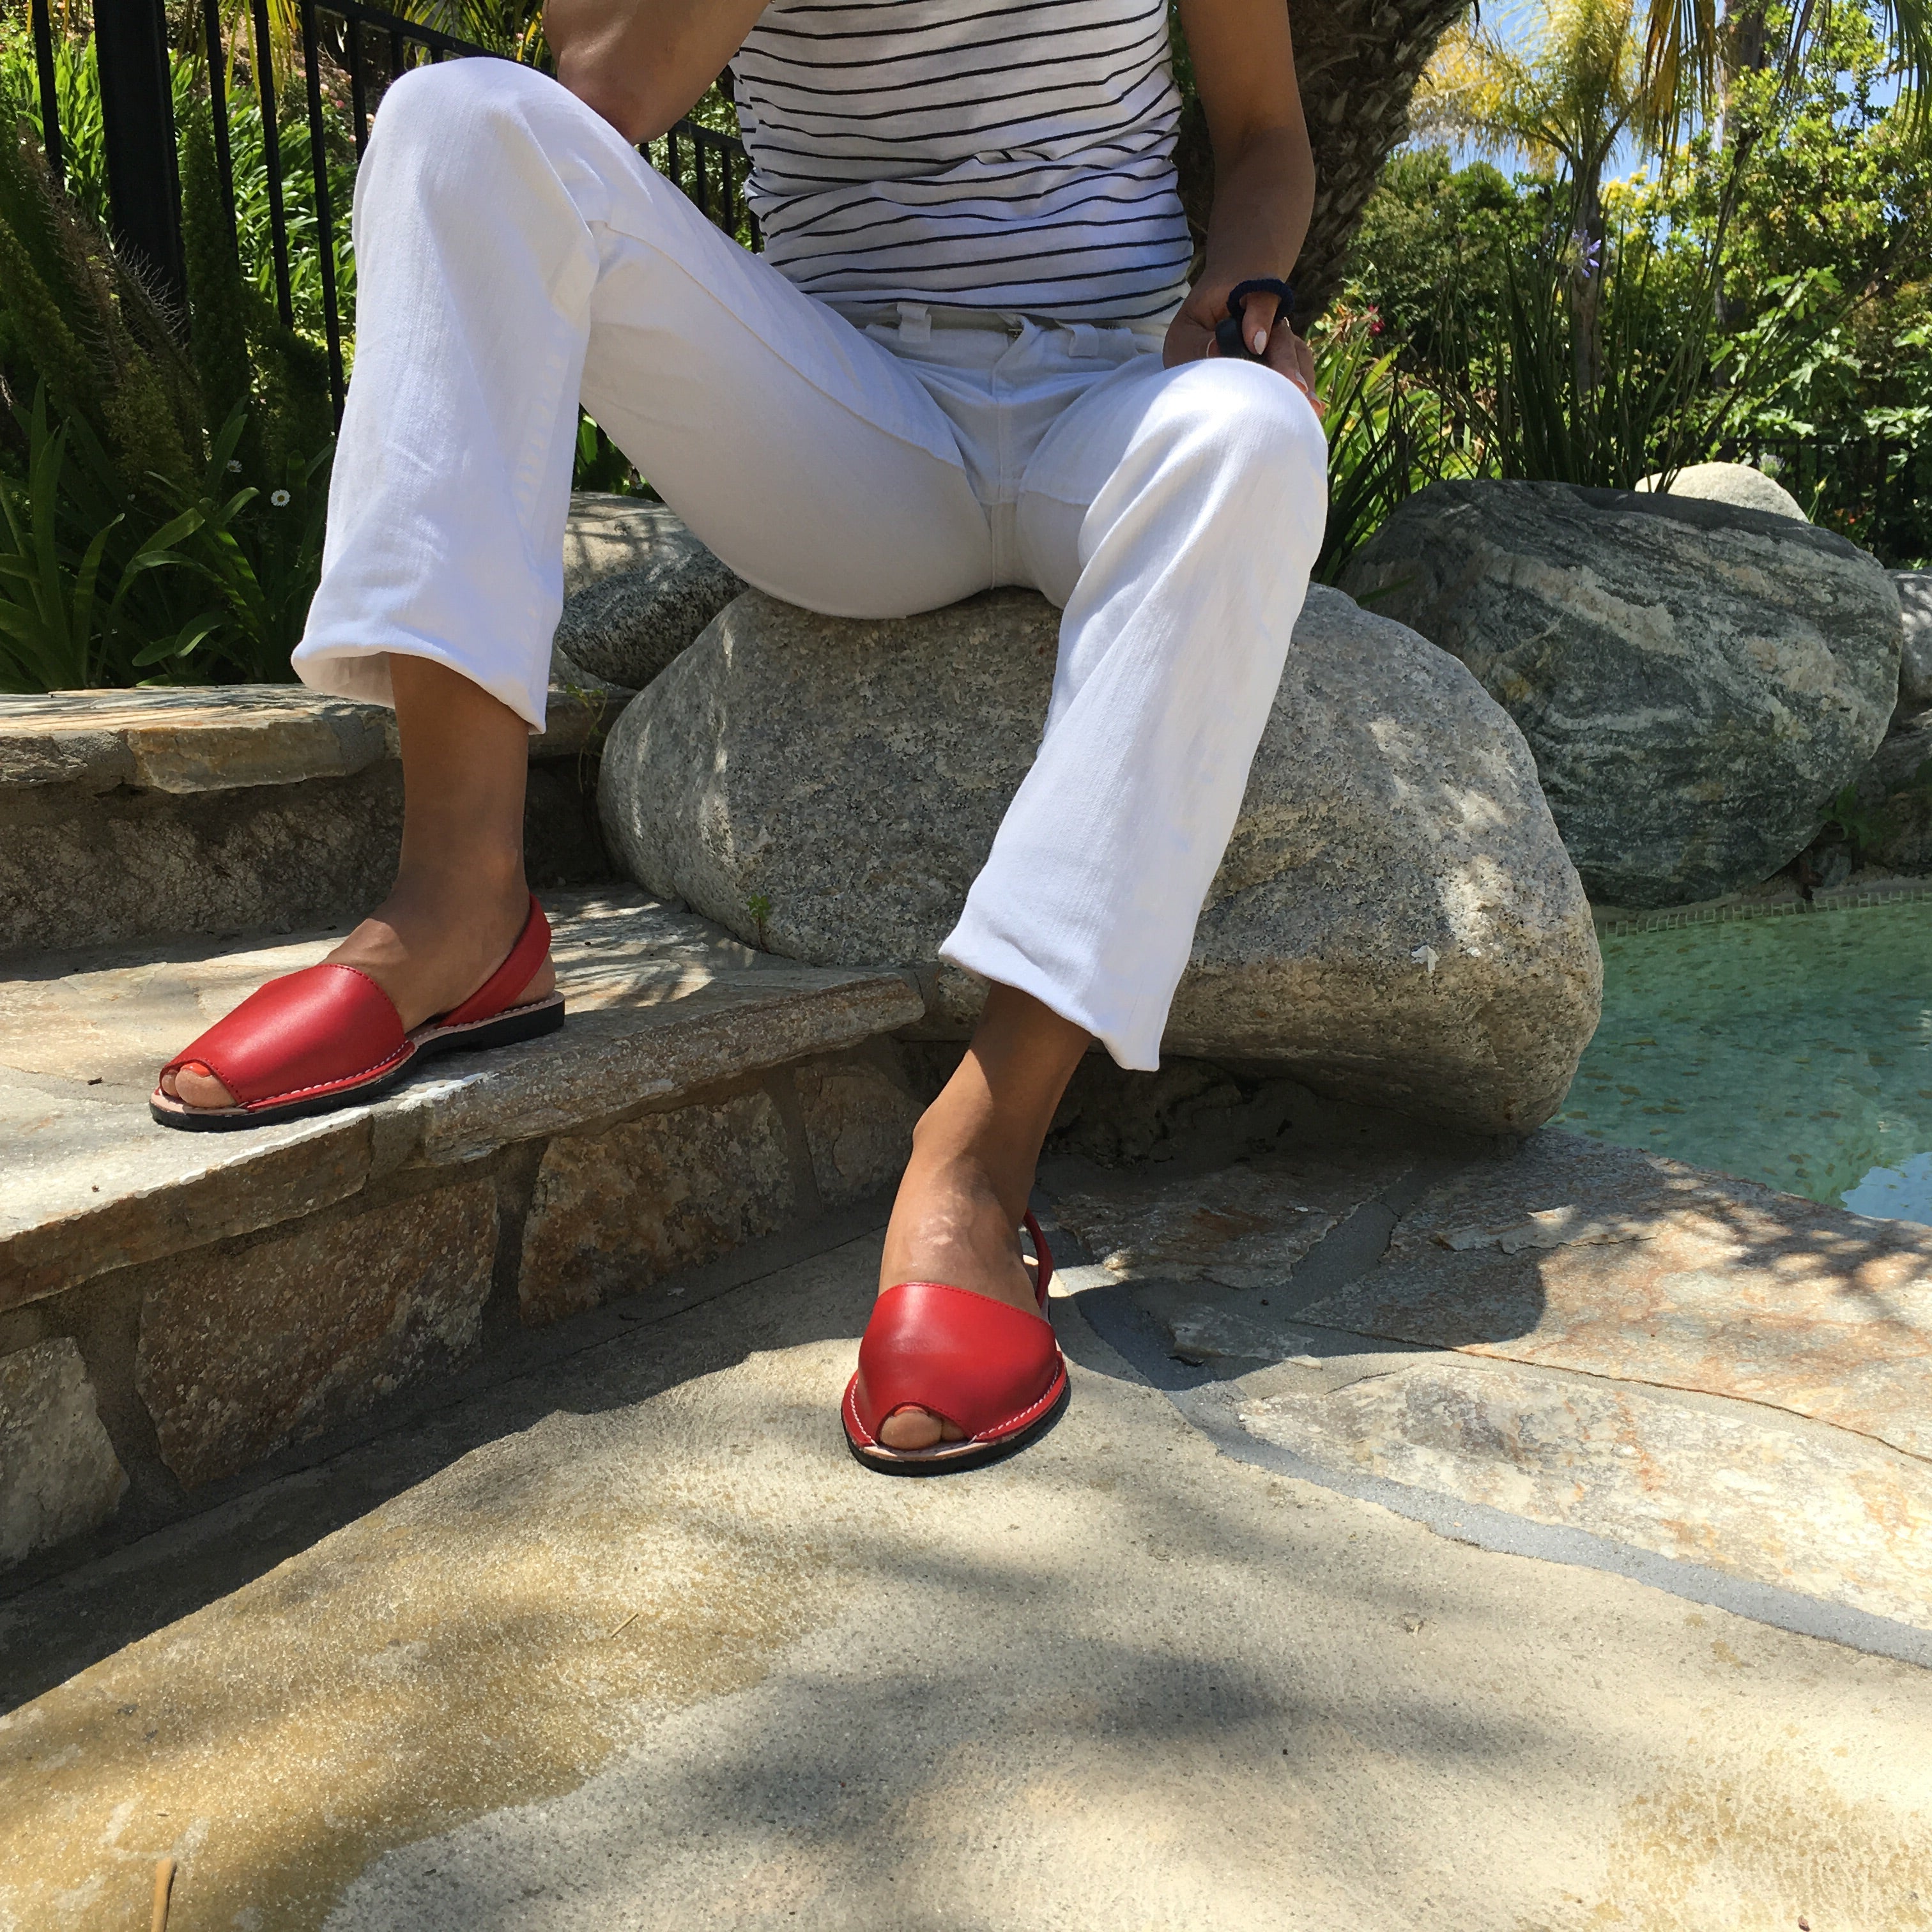 Classic red sandals with white pants  - Instagram